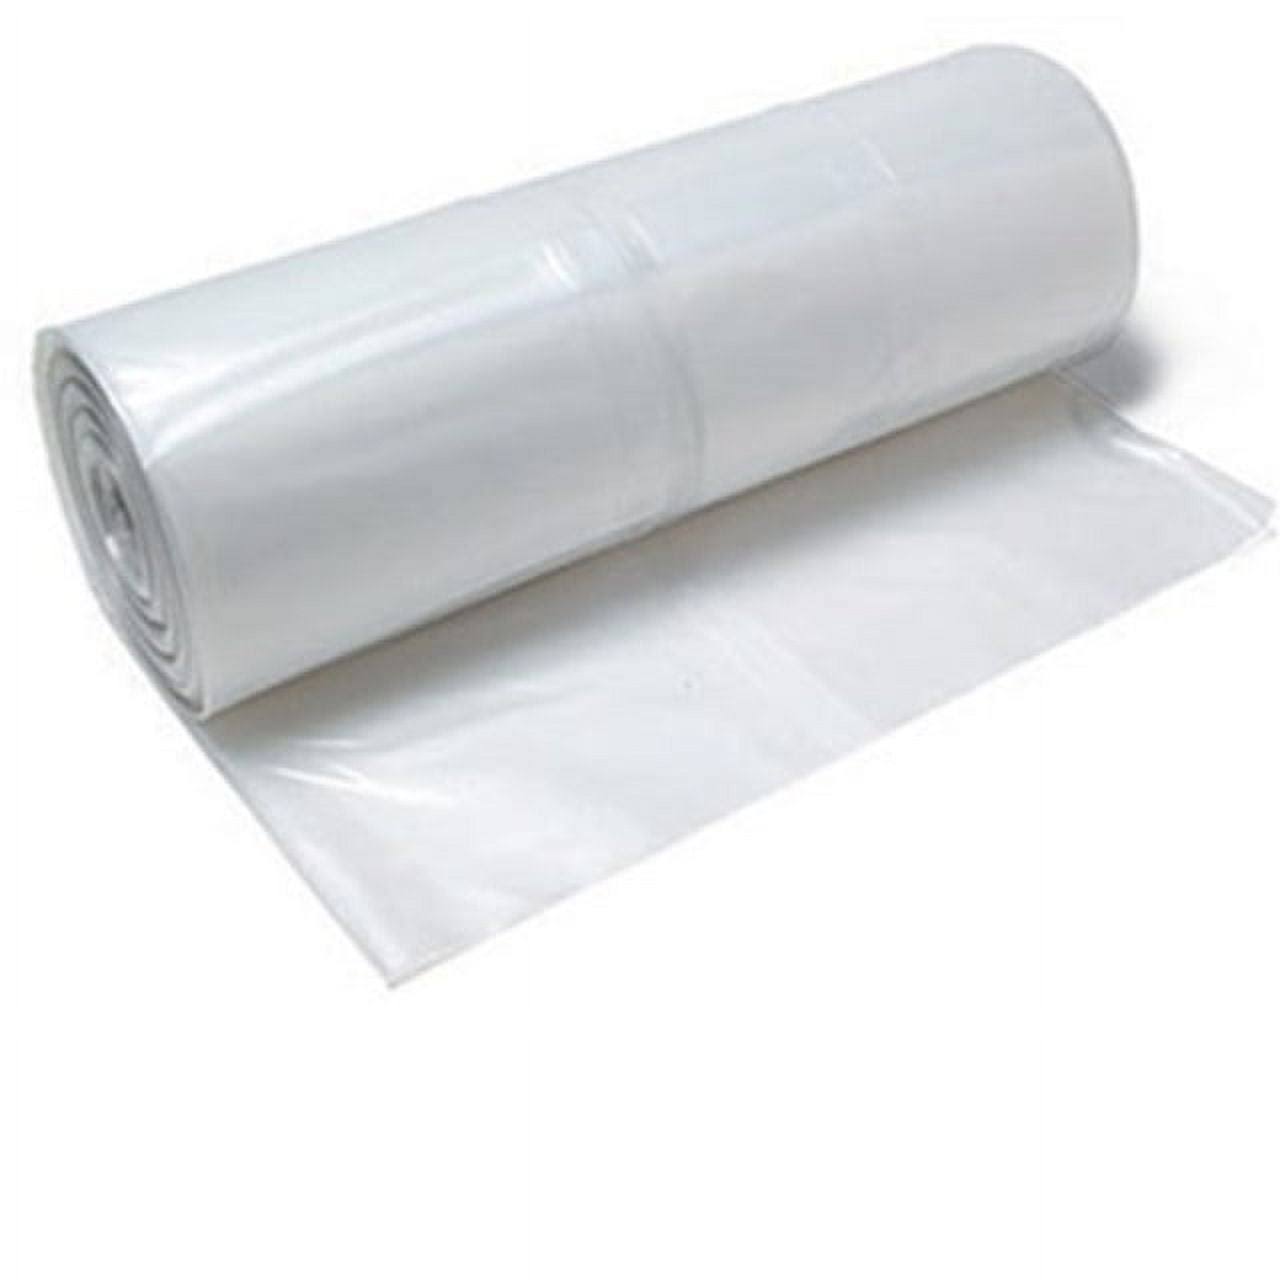 TRM Manufacturing 212C Weather All Plastic Sheeting, 212C, 12' X 200' 2 MIL, Translucent Visqueen, 1 Roll, Clear